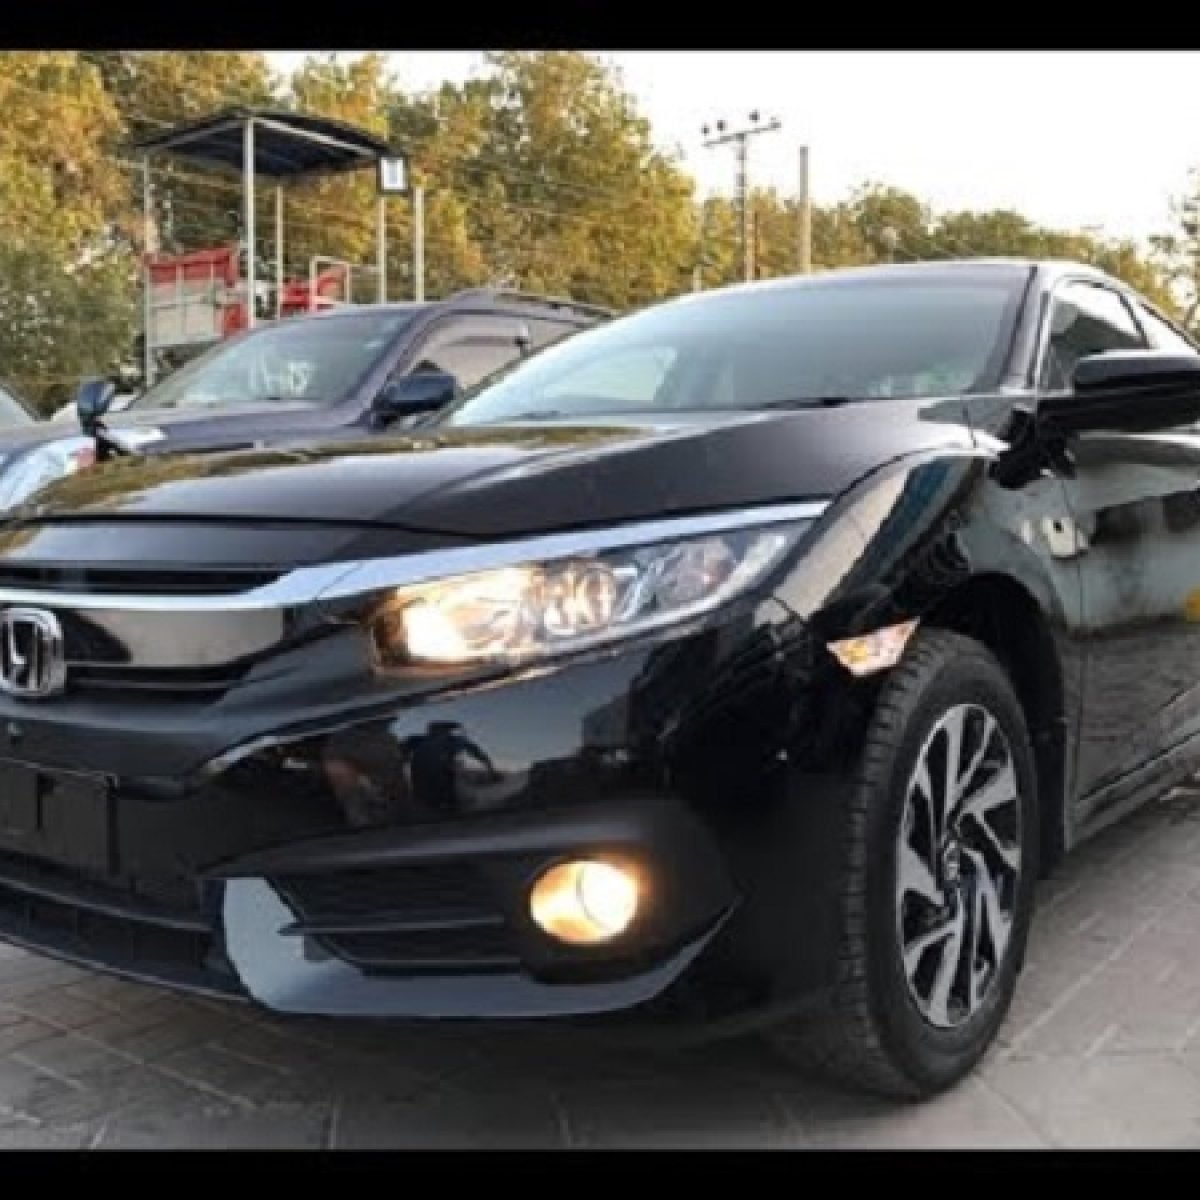 Honda Civic 2019 Facelift Launches In Pakistan Research